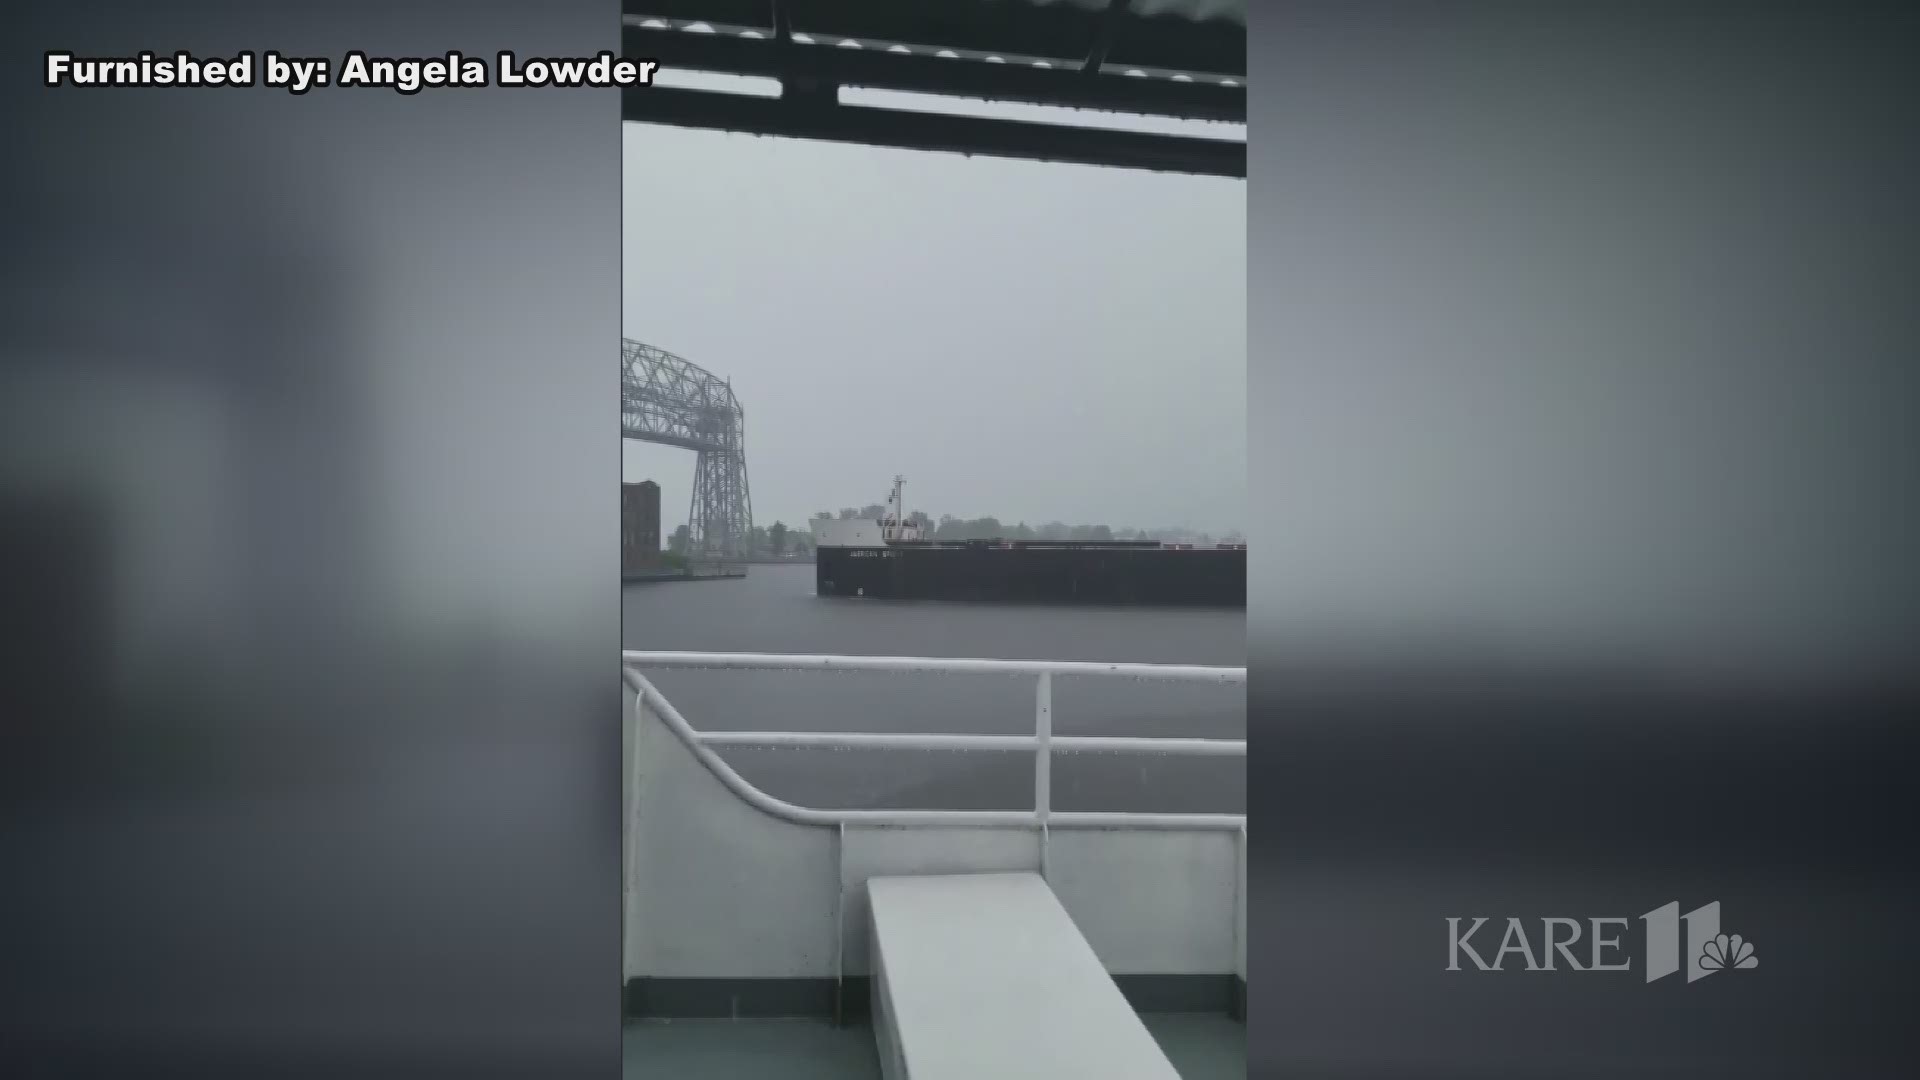 Strong currents and heavy rains brought a 1,000-foot ship a little too close to Duluth's break wall for comfort. Video: Angela Lowder. https://kare11.tv/2yly3Nu